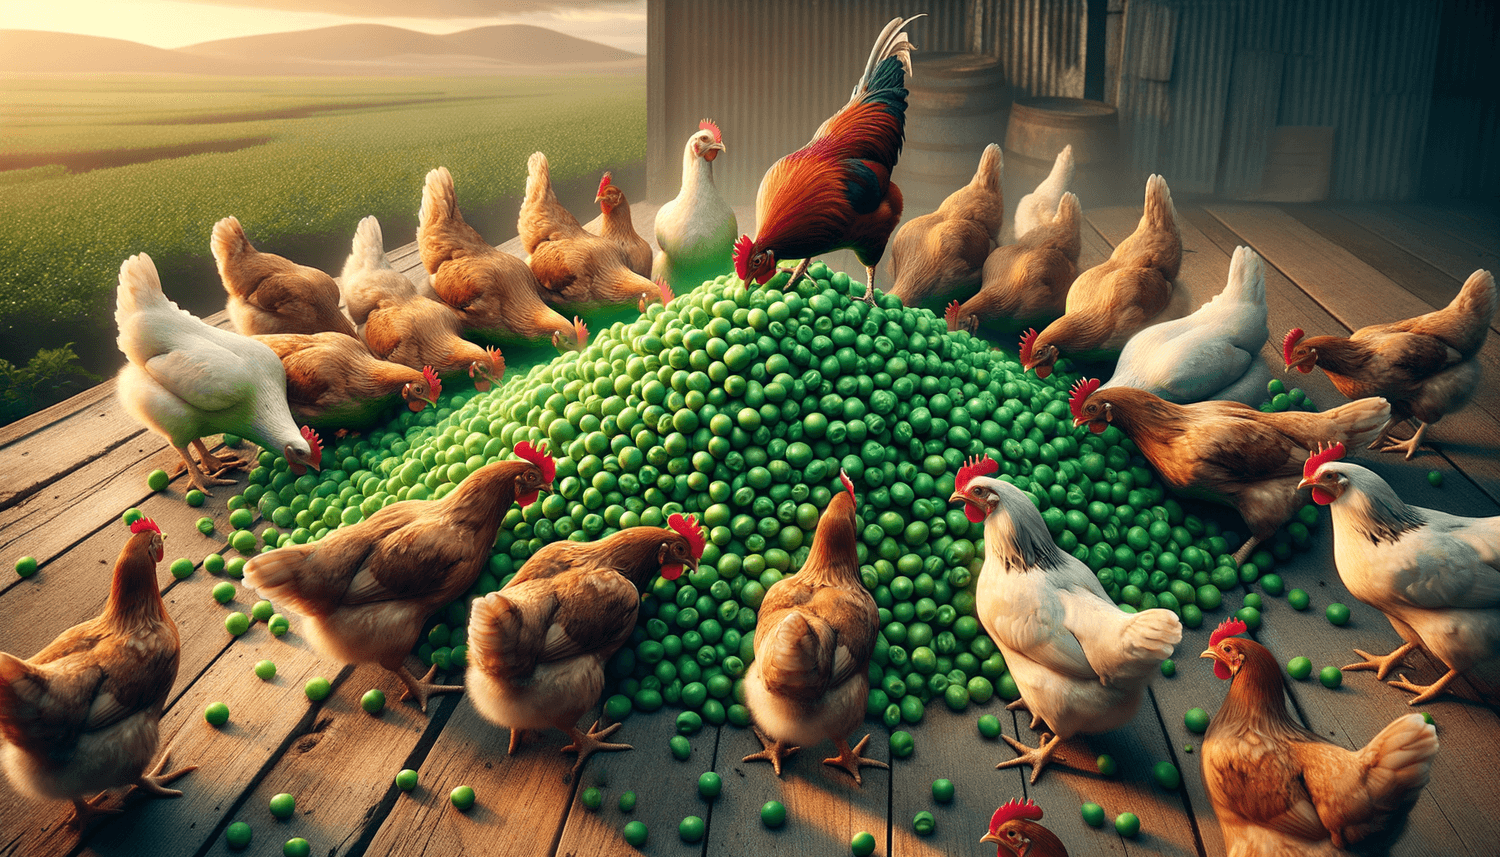 Can Chickens Eat Raw Peas?